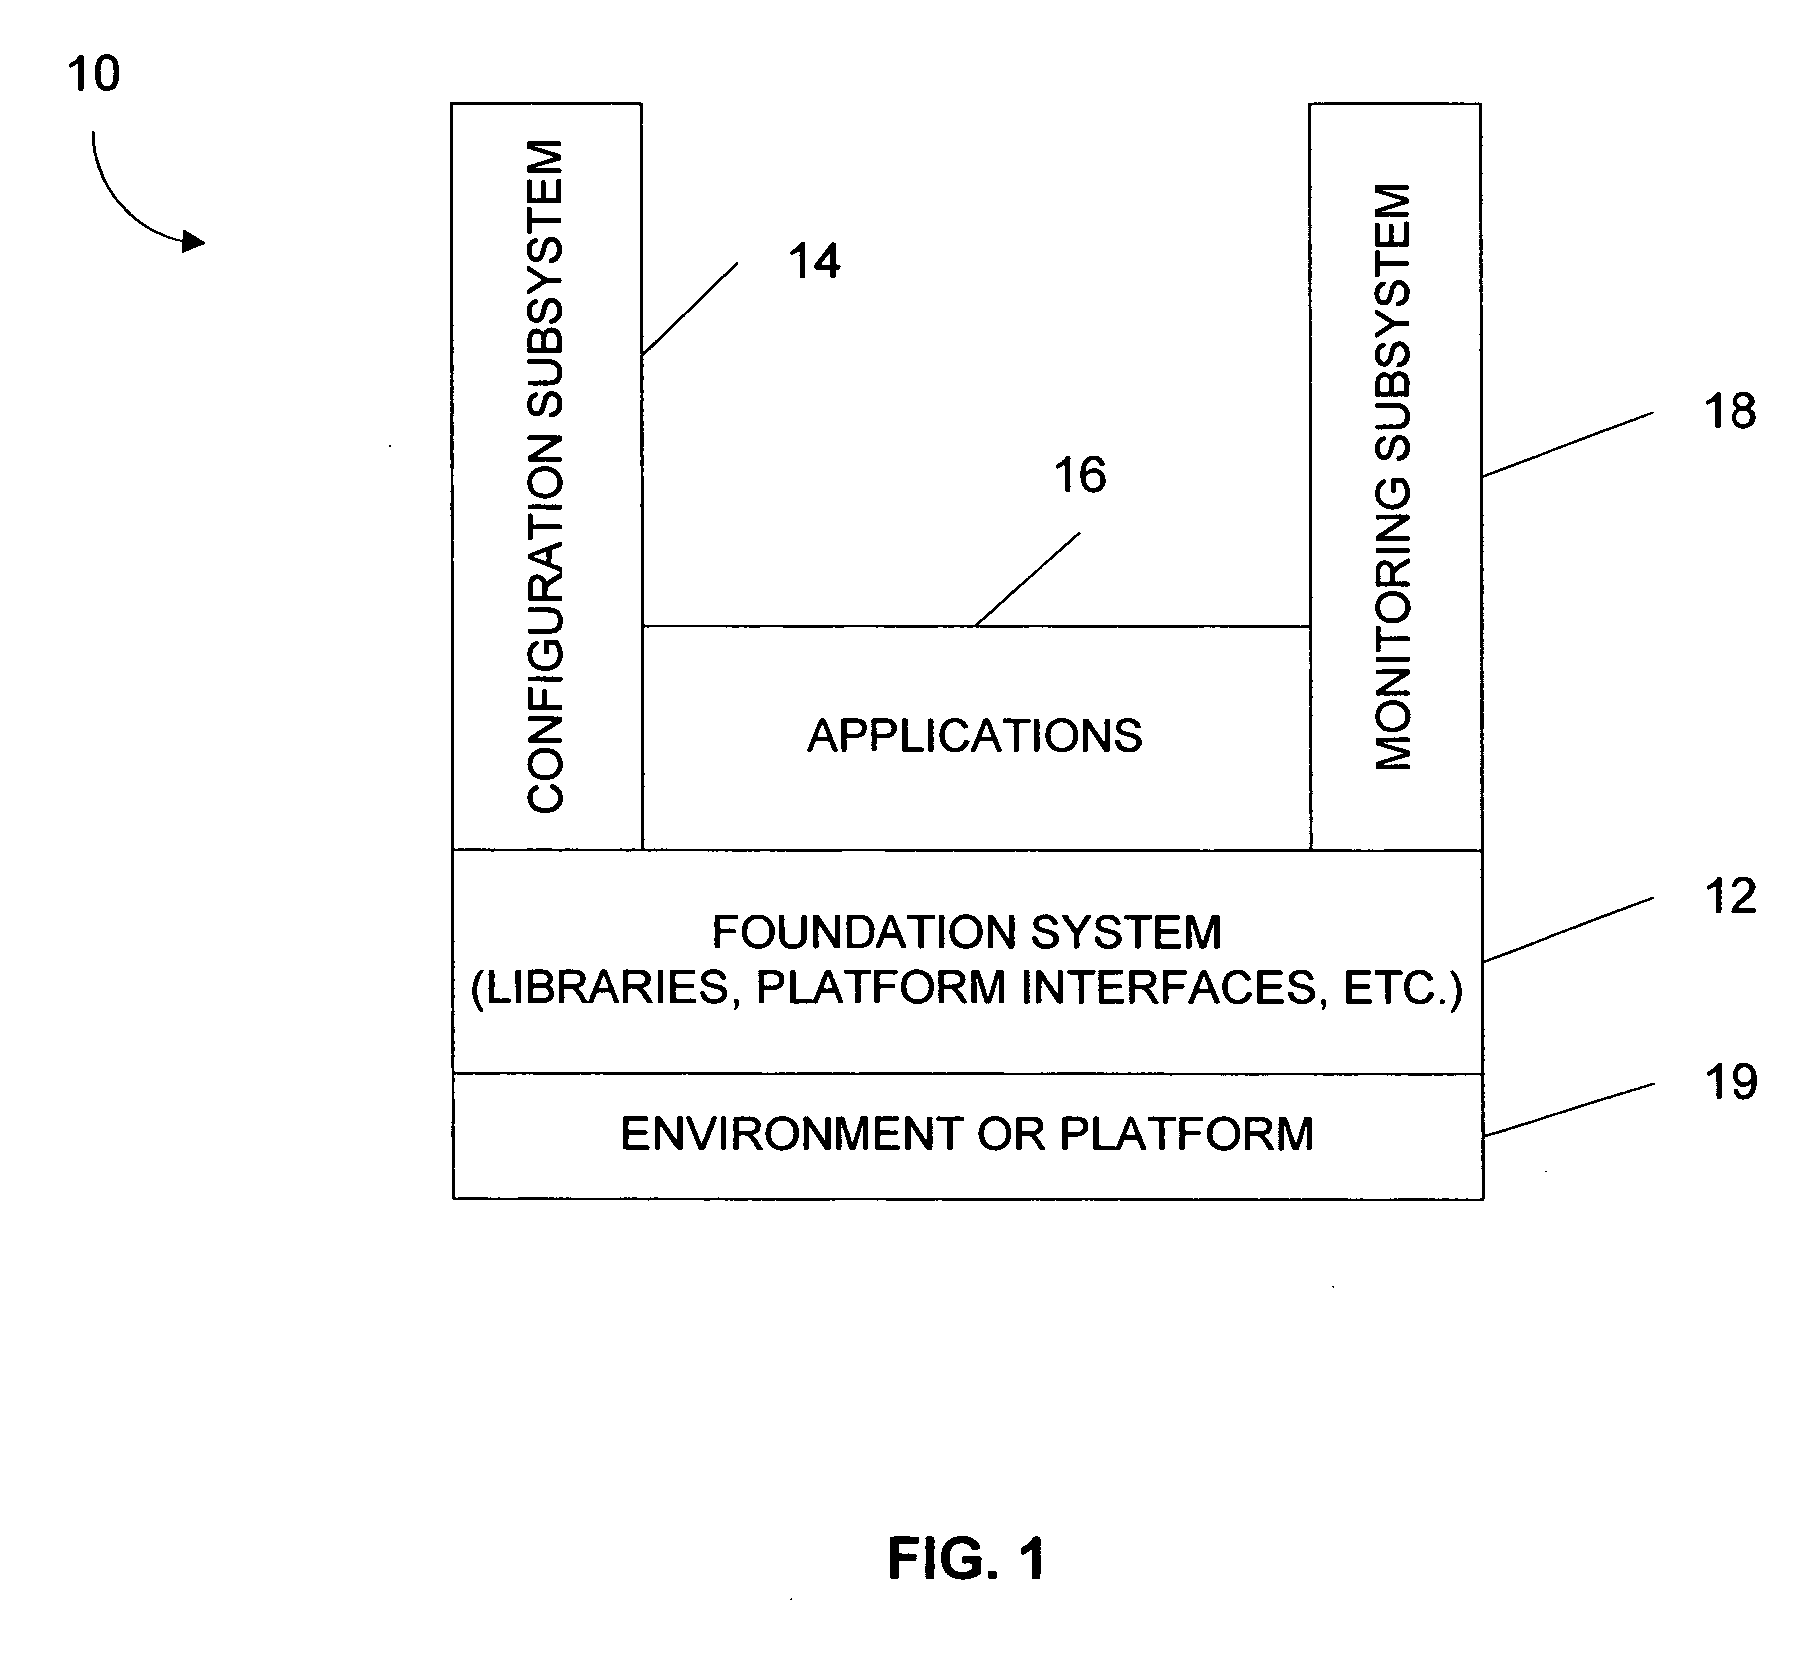 Methods and systems for licensing computer software